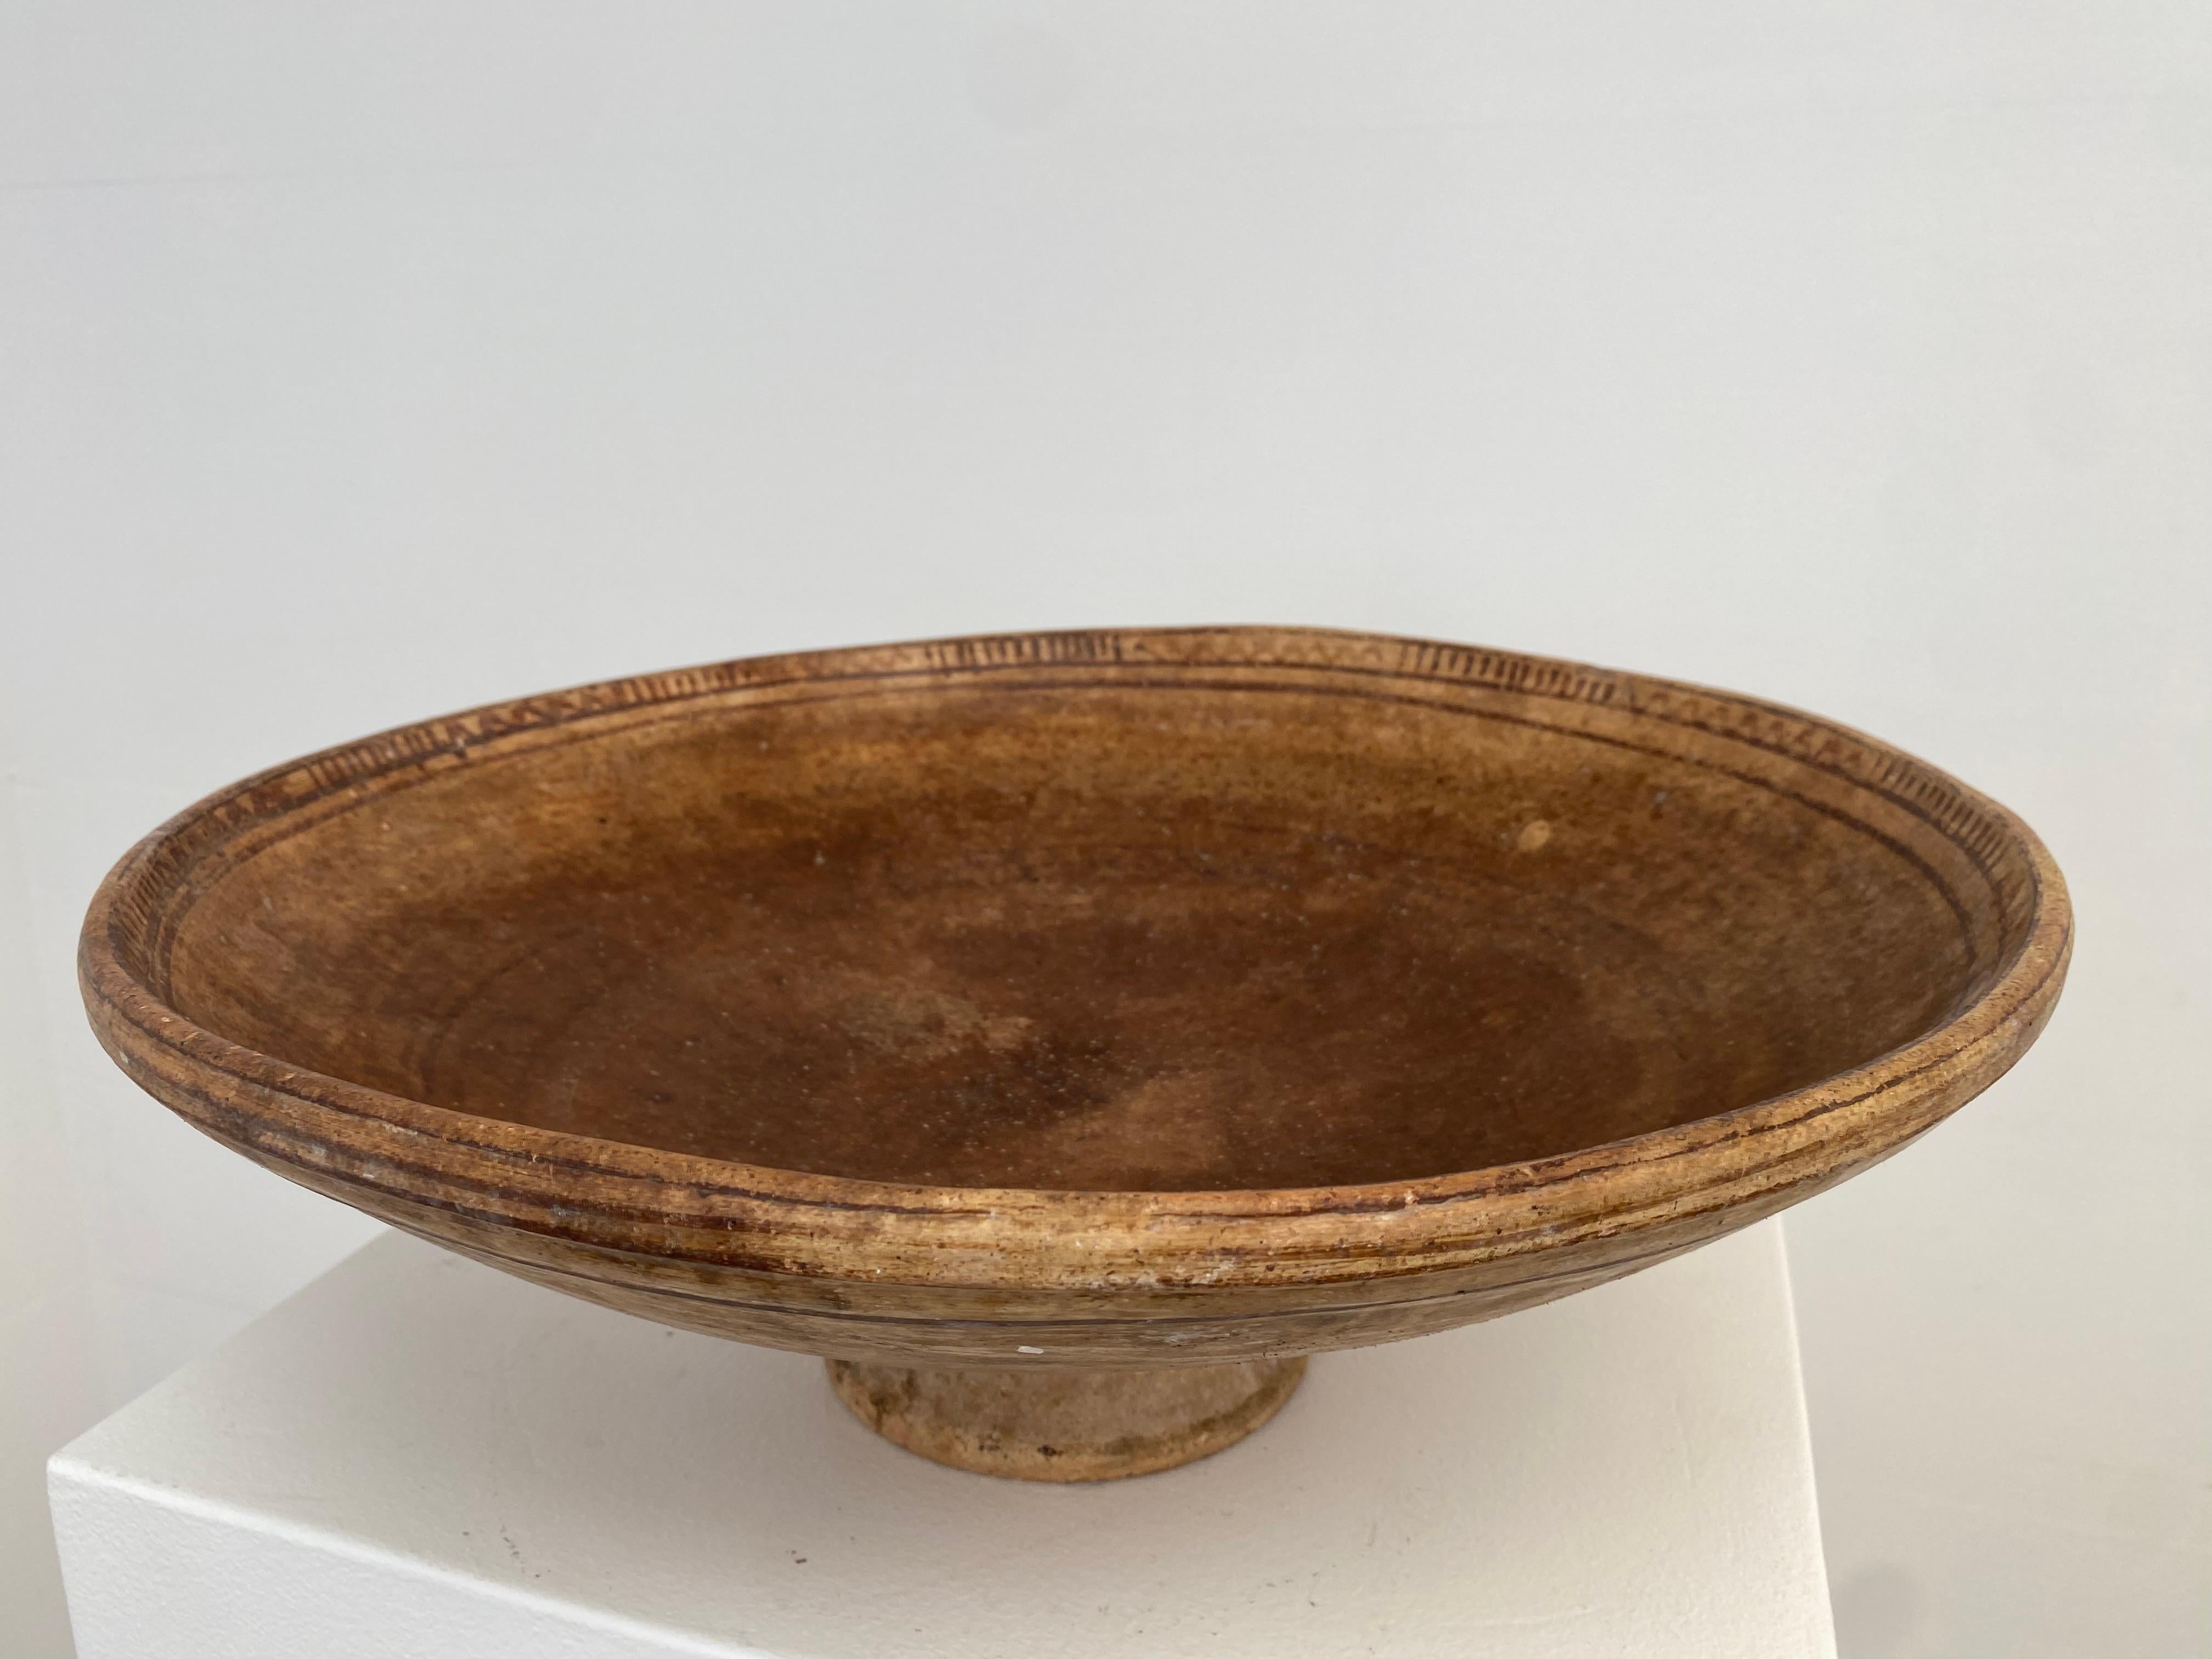 Beautiful,antique Berber Terracotta Tazza on a central foot,
beautiful Brown and beige colors and a good old patina and shine 
of the Terracotta, faded elegant decorations,
a very decorative object to be used for different purposes 